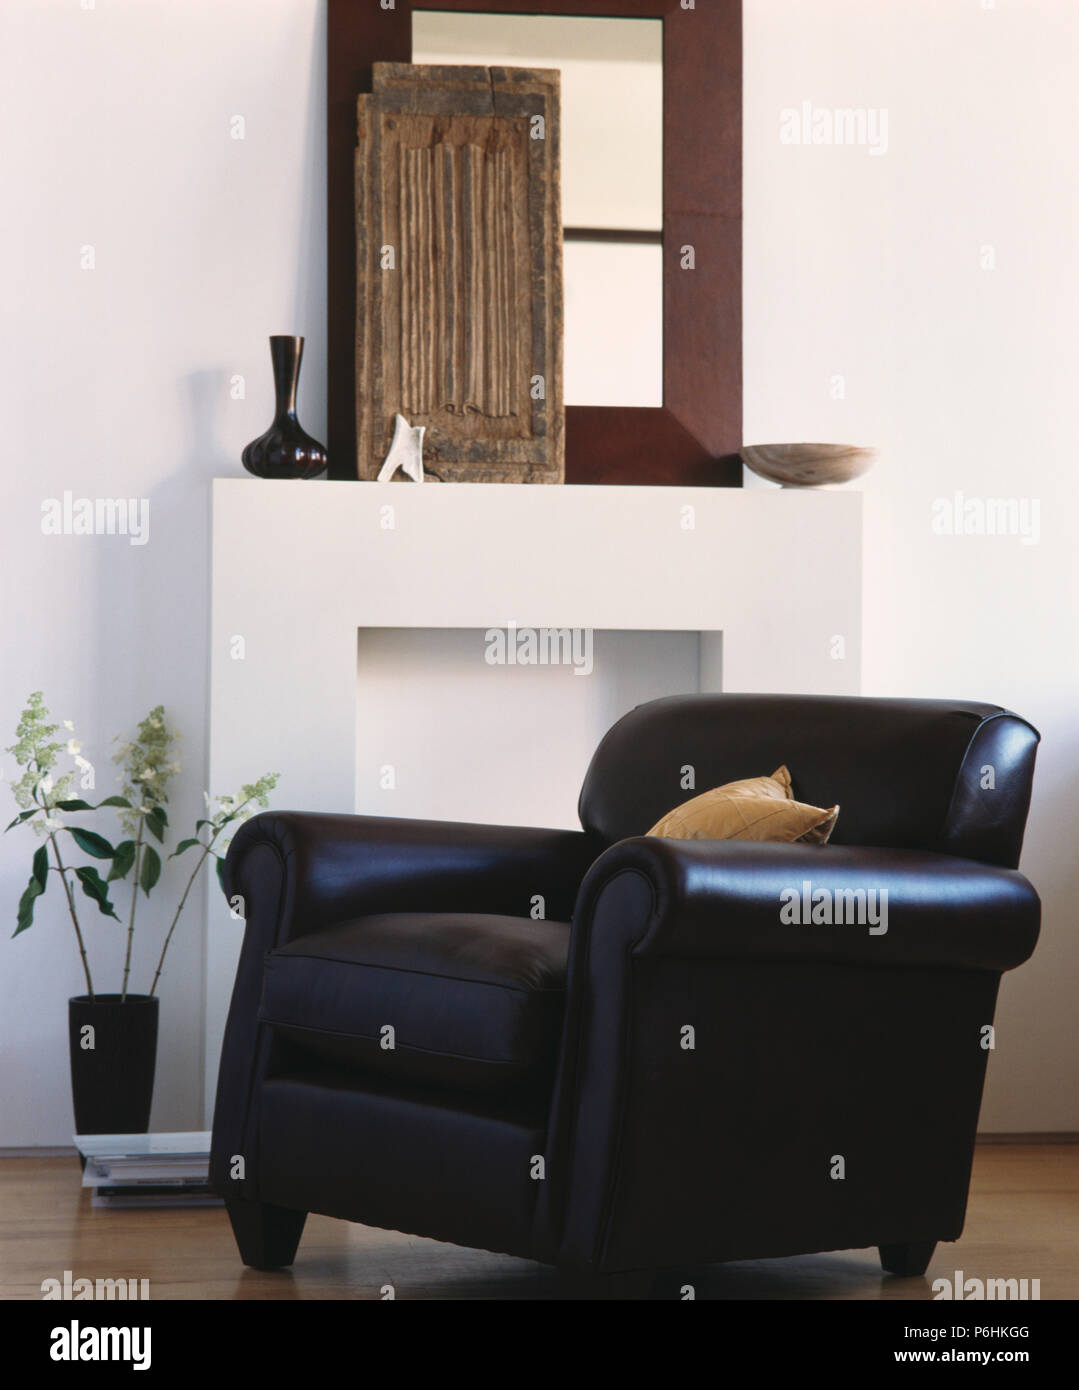 Black Leather Armchair Beside Simple White Fireplace With Mirror